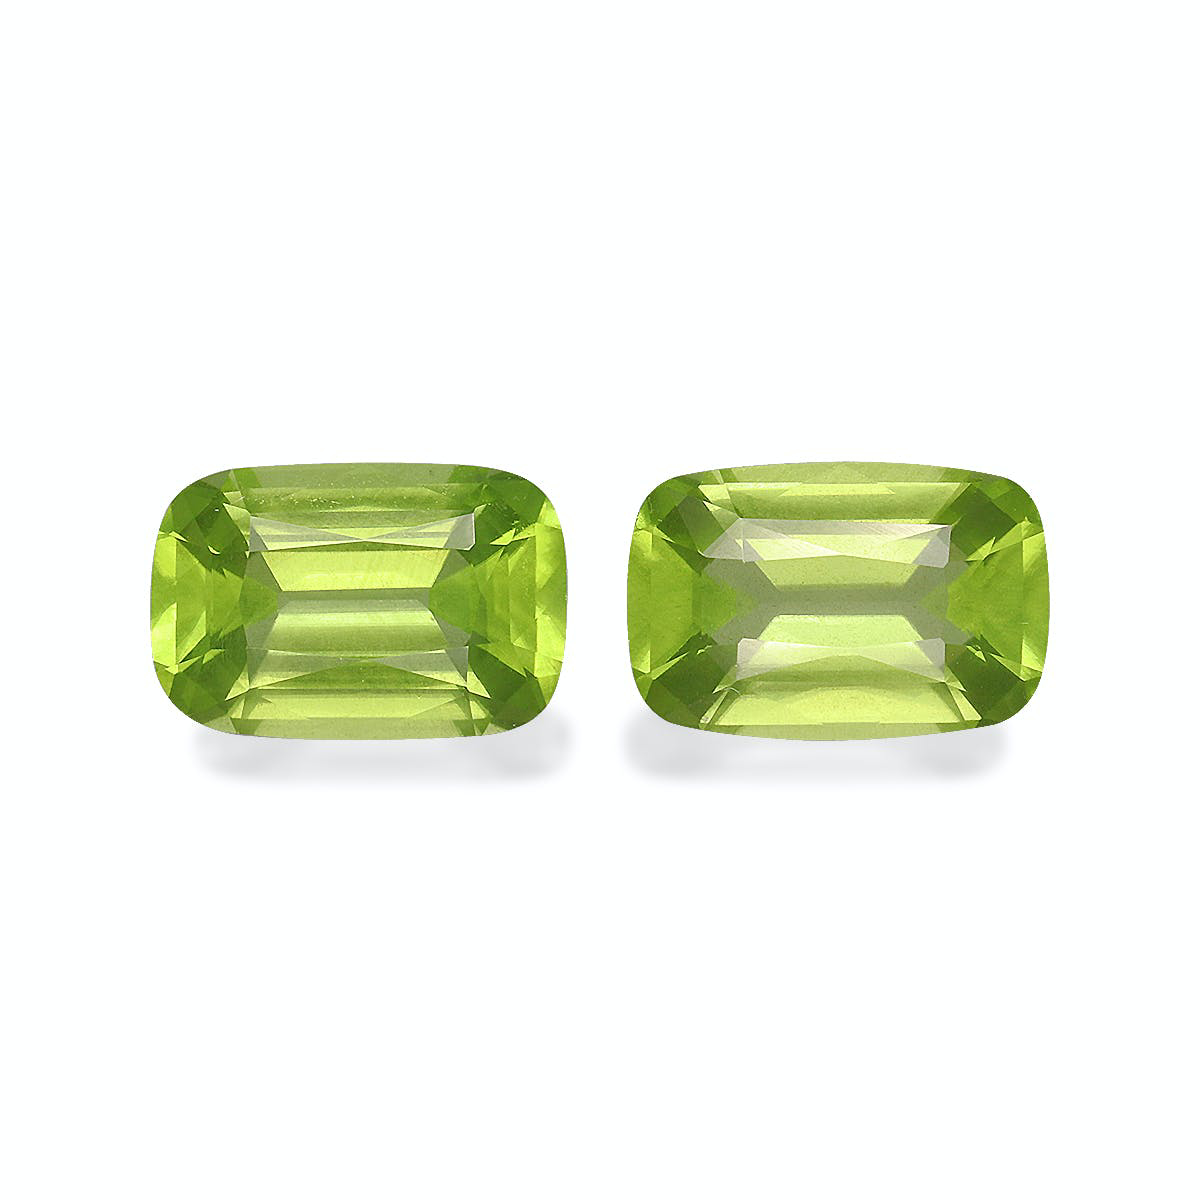 Picture of Lime Green Peridot 5.75ct - Pair (PD0140)